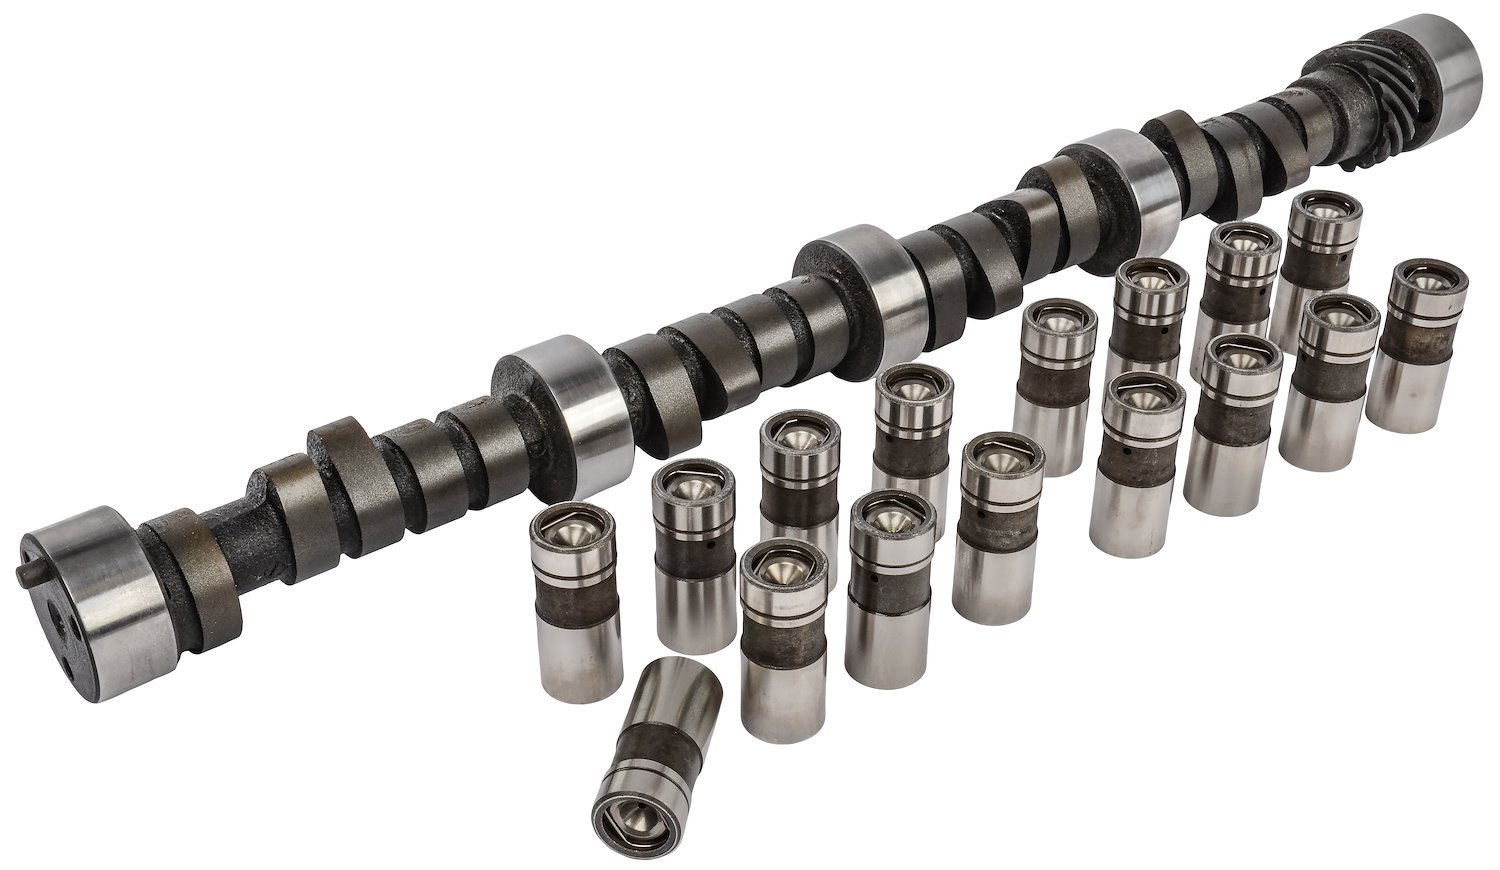 Hydraulic Flat Tappet Camshaft and Lifters for 1957-1985 Small Block Chevy 262-400 ci [3000-6500 RPM Range]